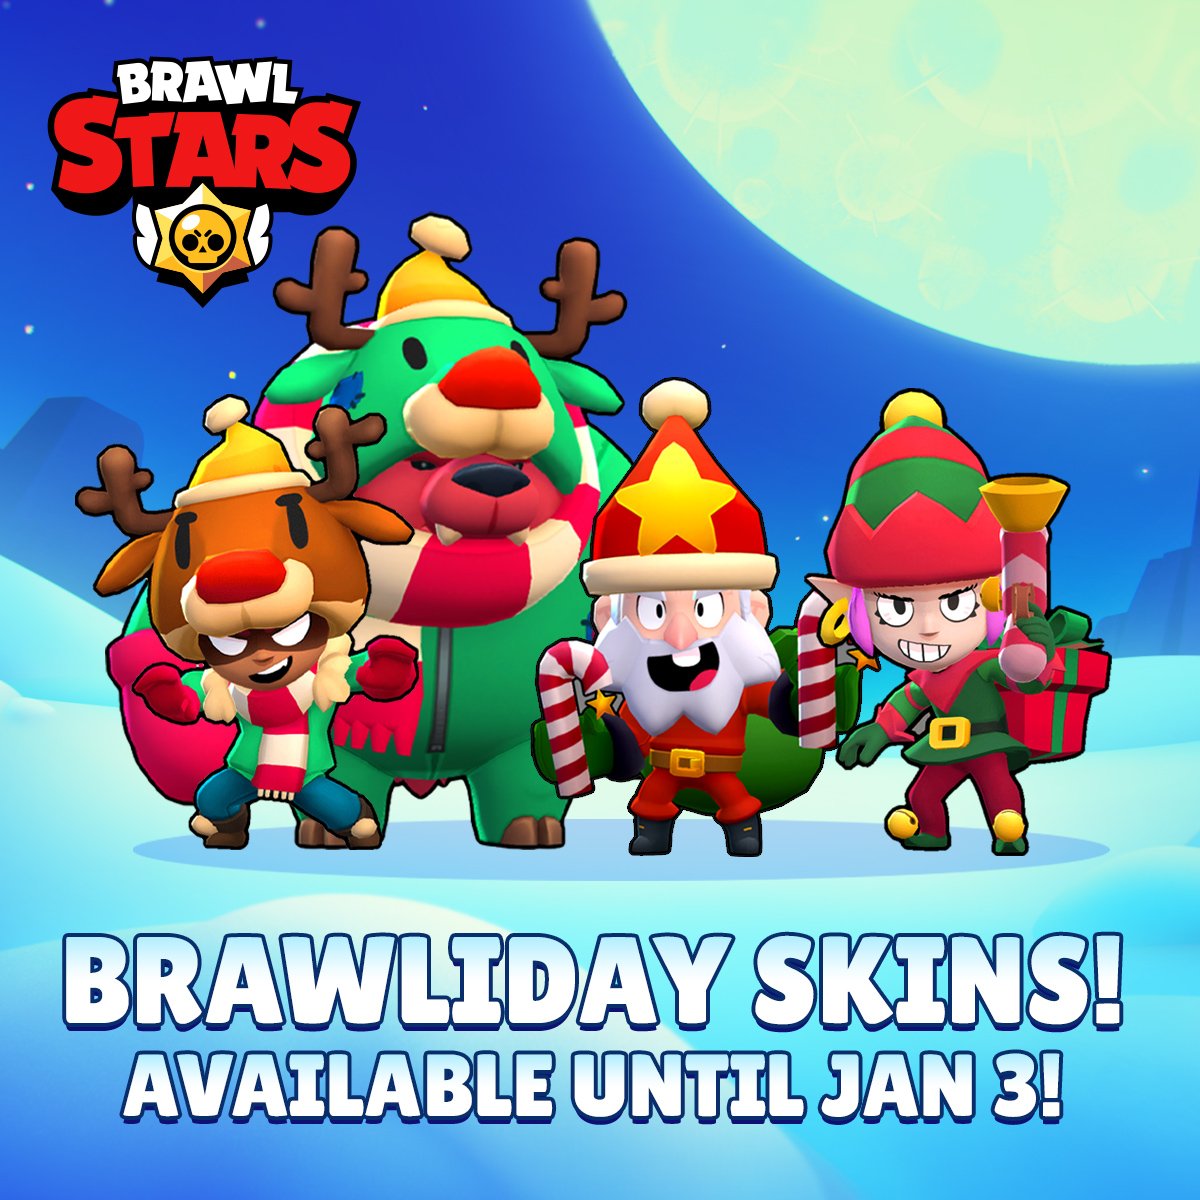 Brawl Stars On Twitter Happy Brawlidays Skins Available For Purchase For A Limited Time You Can Buy Them Now And Keep Them Forever However After January 3 Nobody Will Be Able To - what to buy in brawl stars